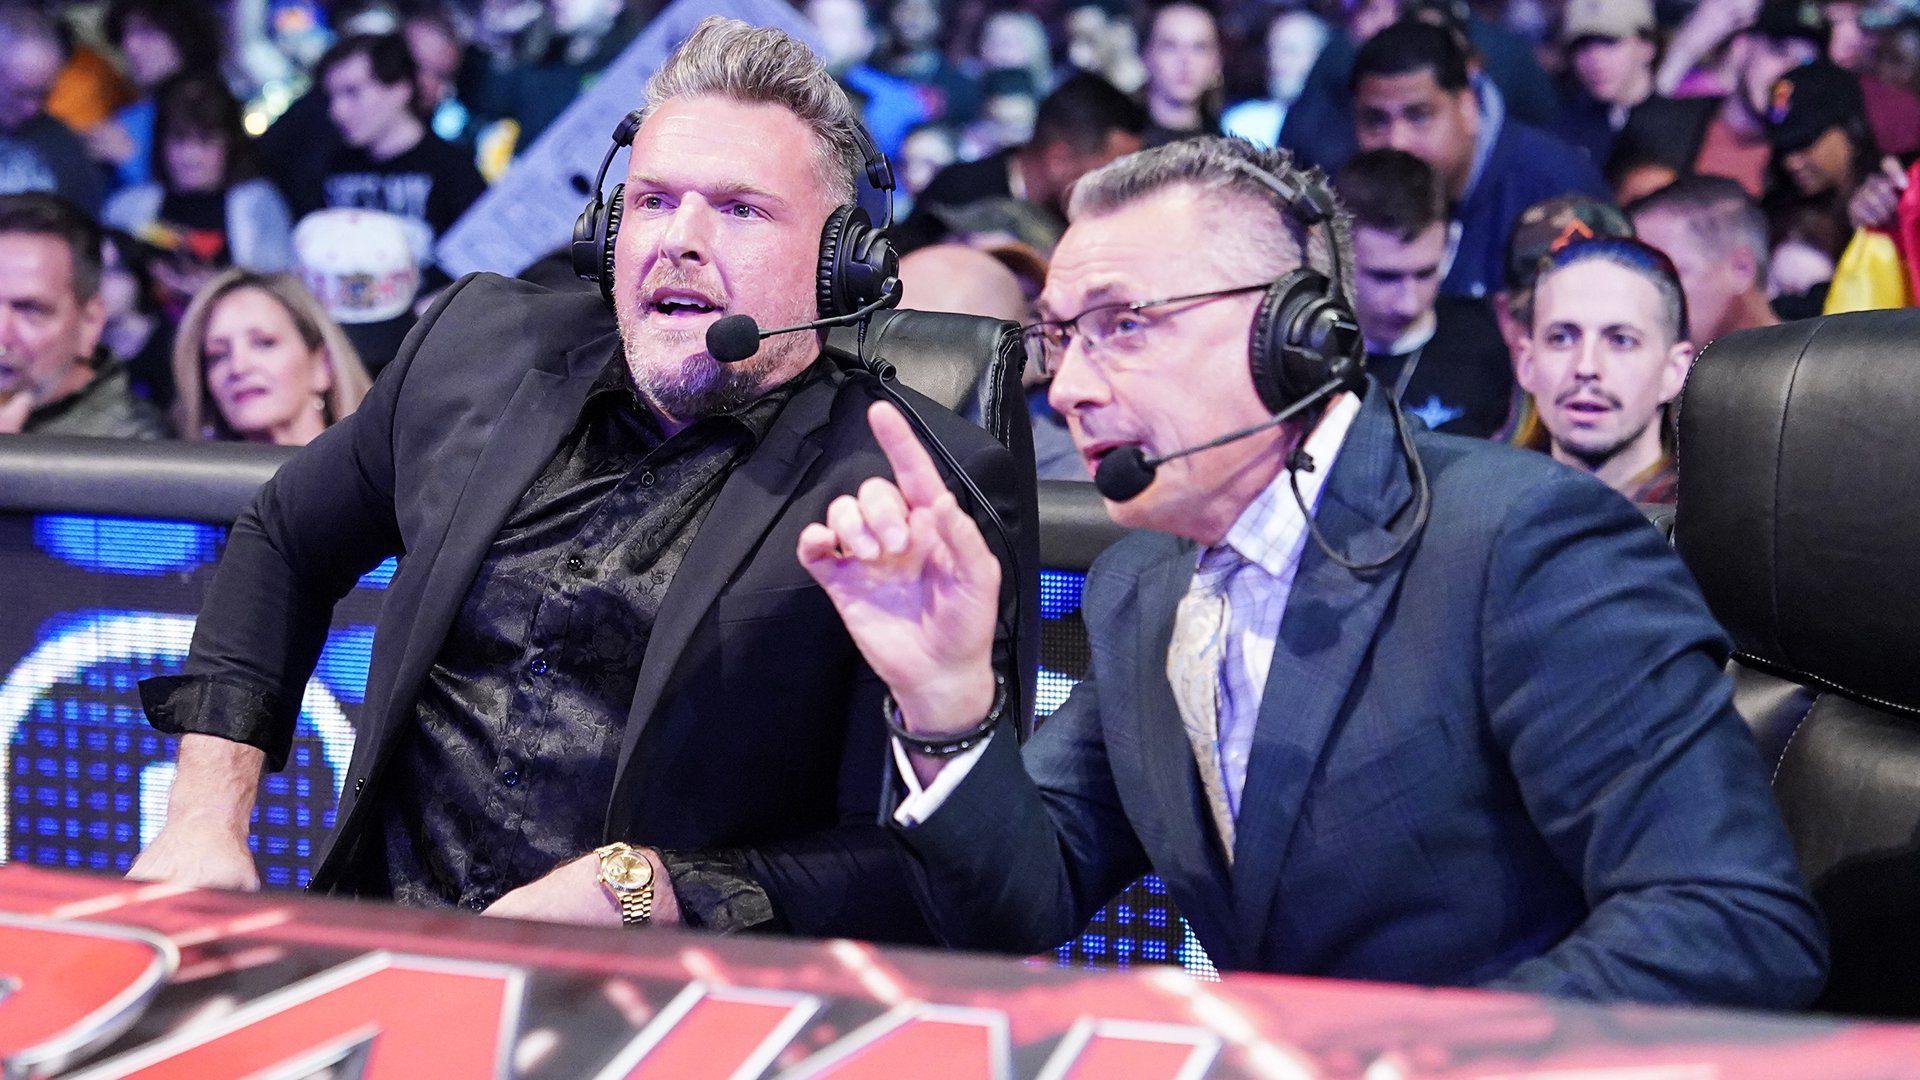 Pat McAfee was absent on the June 24 episode of WWE RAW.